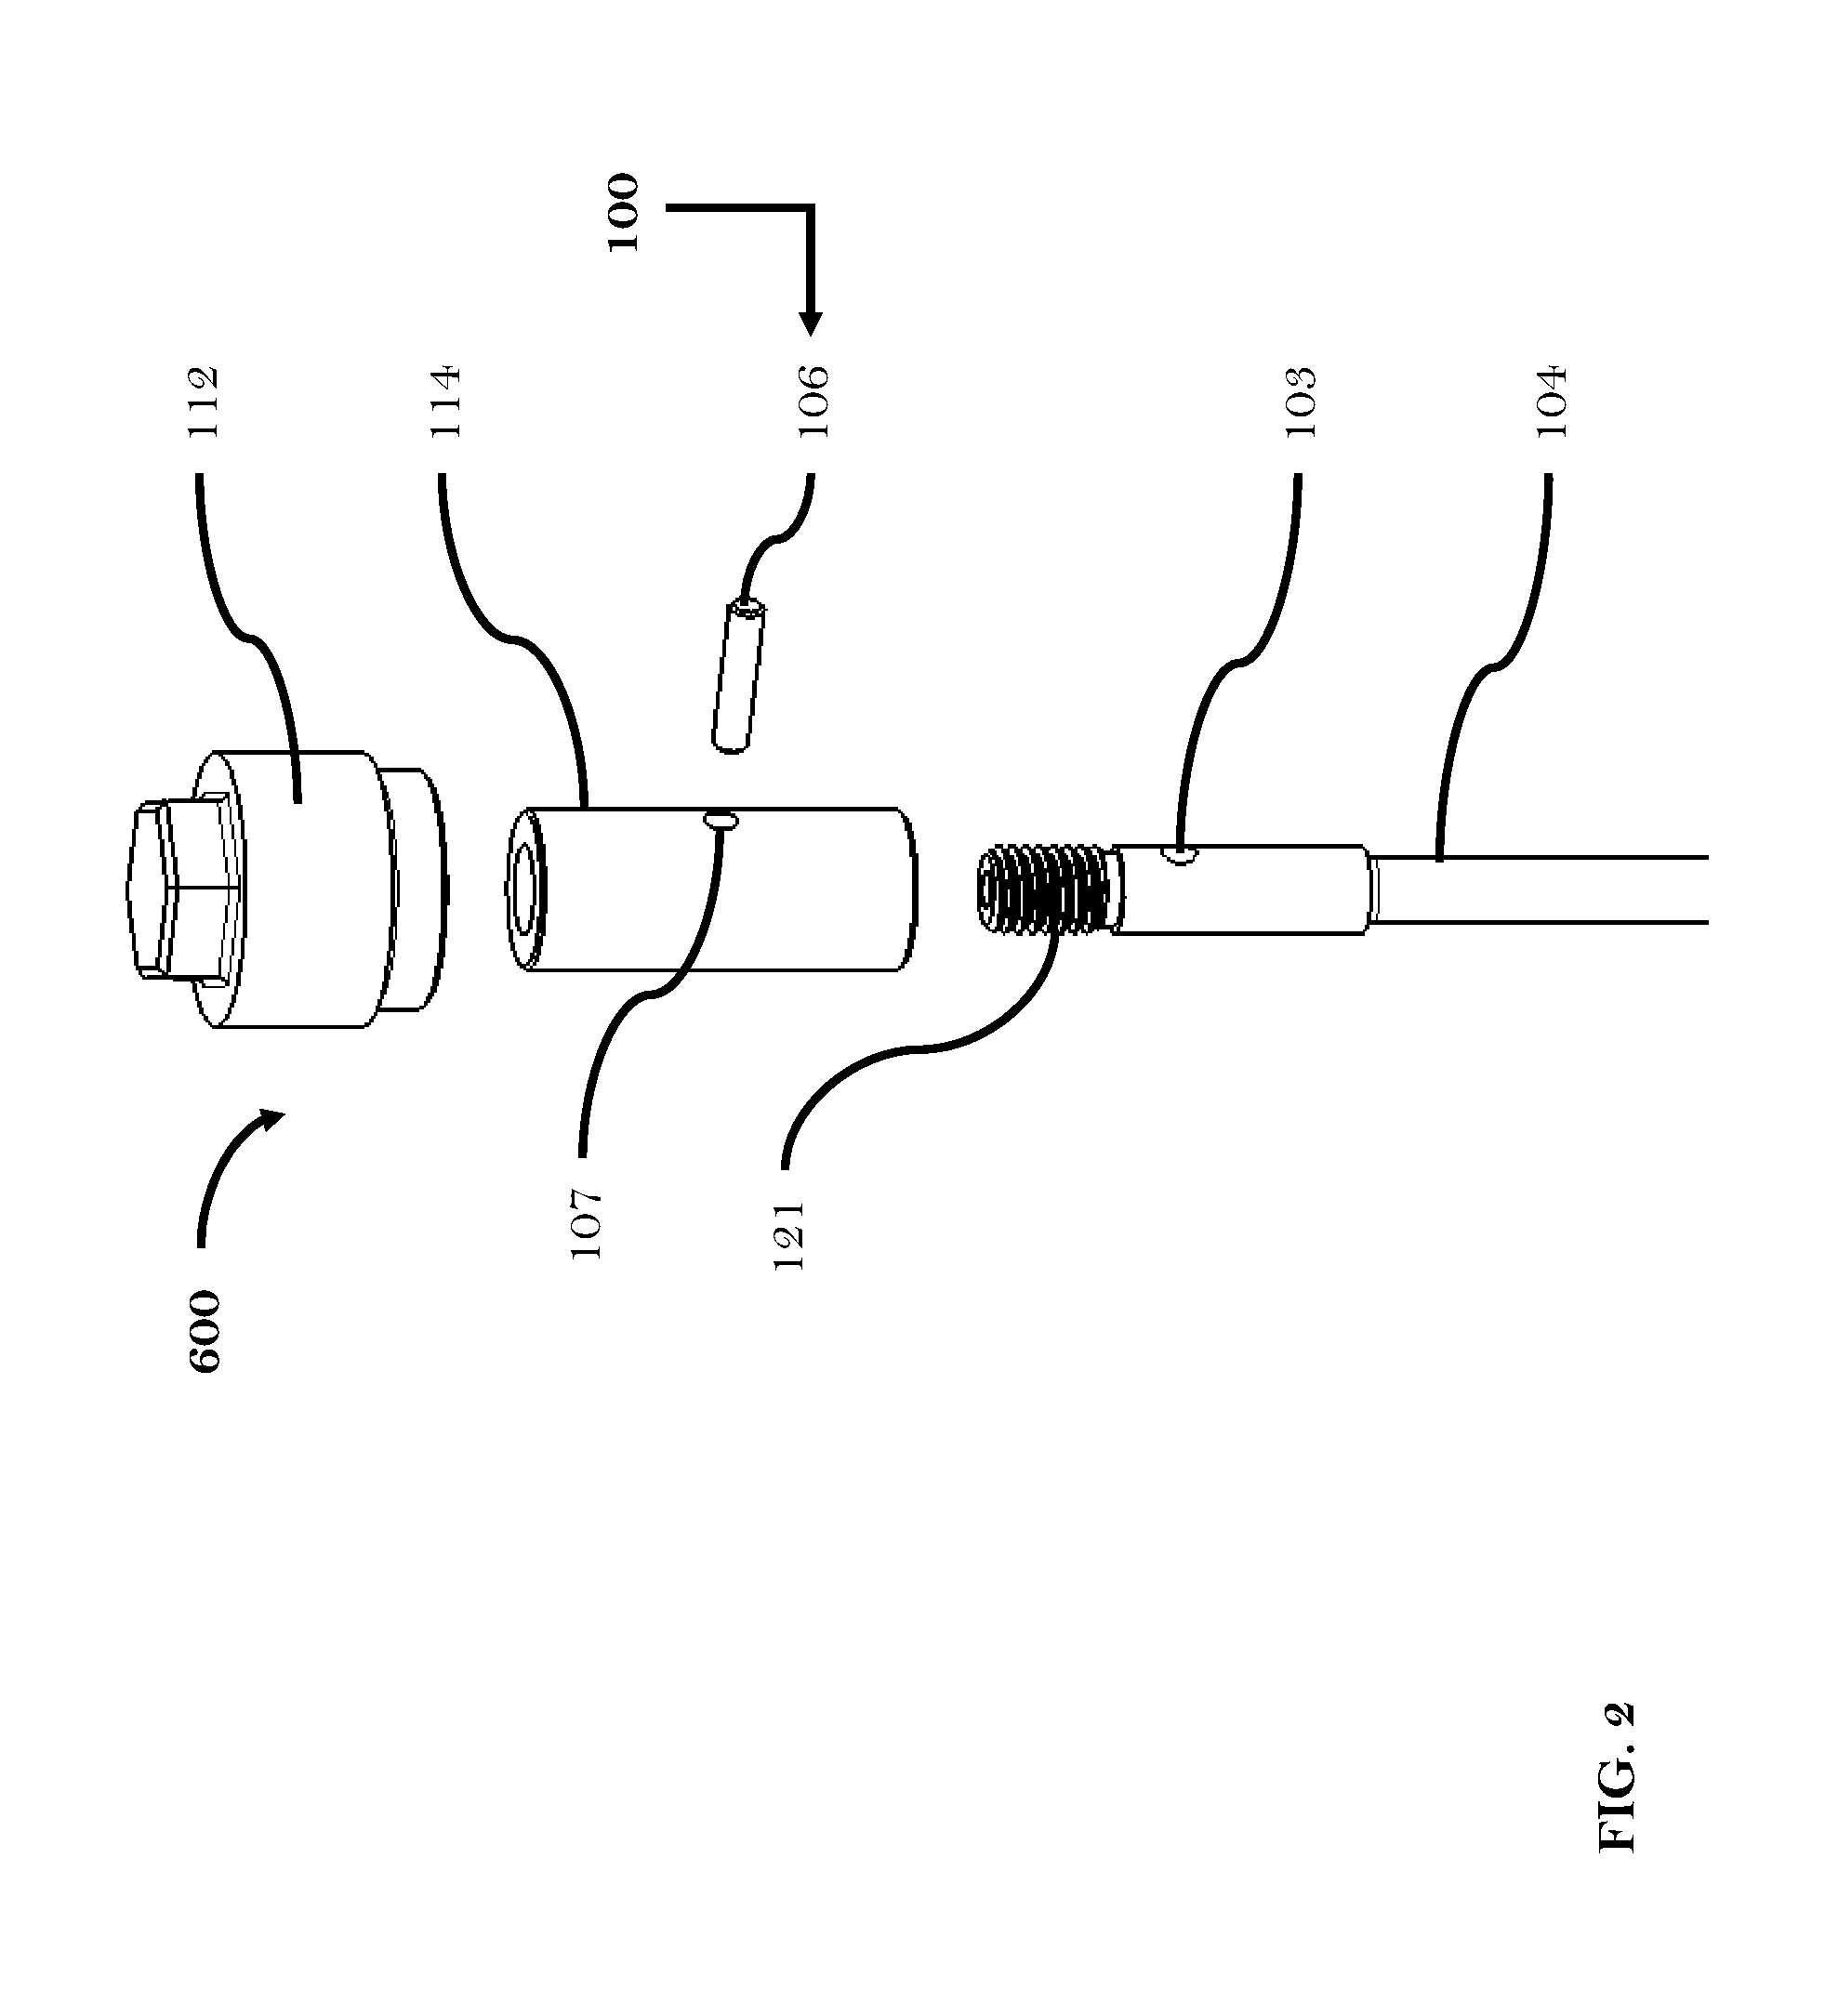 Safety connector for hot runner, having latch destructively interlocking valve stem with actuation plate